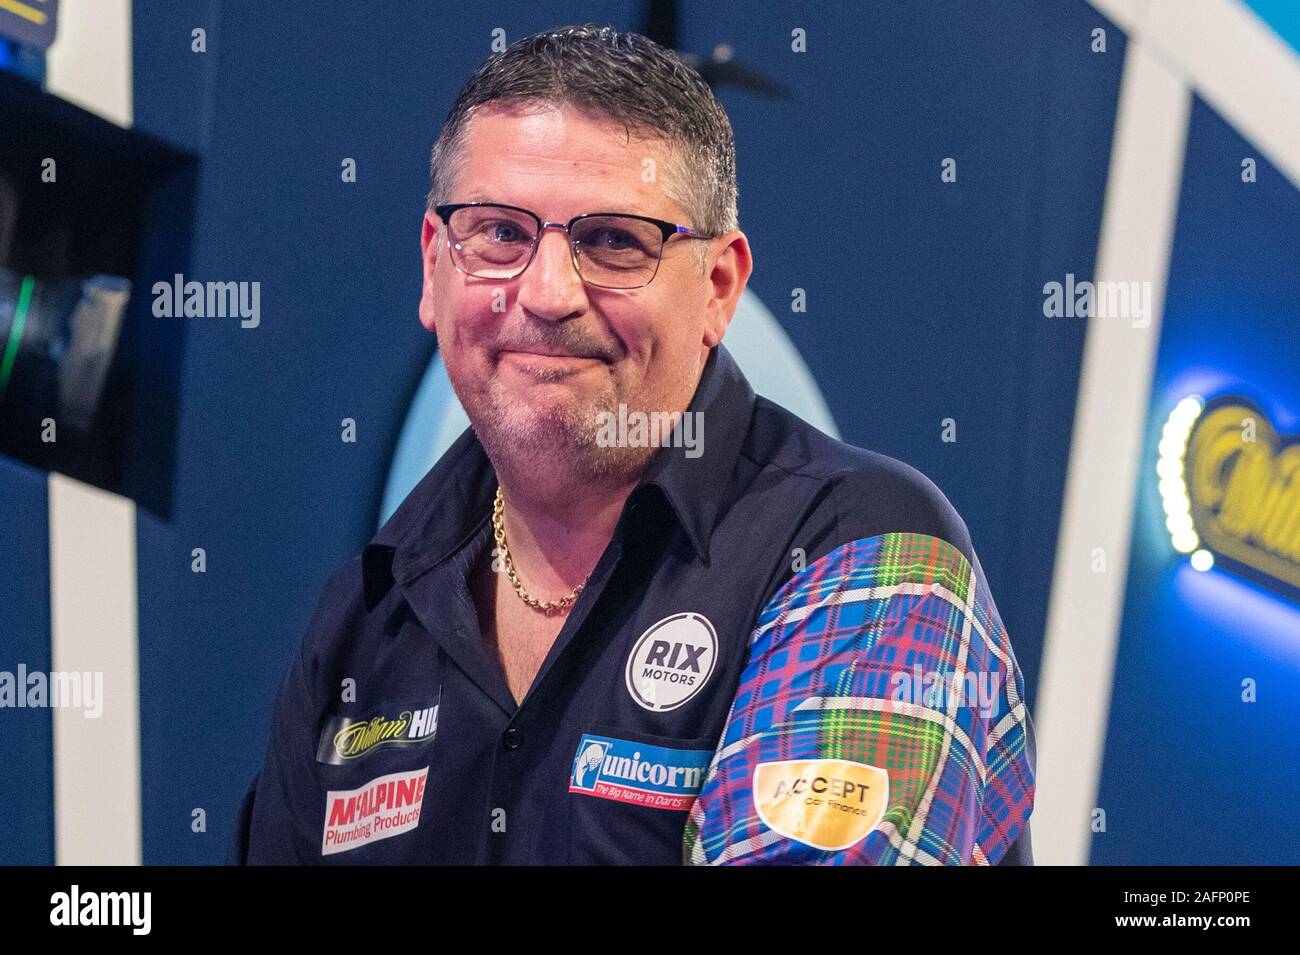 Londen, UK. 16th Dec, 2019. LONDEN, 16-12-2019, Darts player Gary Anderson  celebrating his victory during the William Hill, World Championship Darts,  PDC. Credit: Pro Shots/Alamy Live News Stock Photo - Alamy